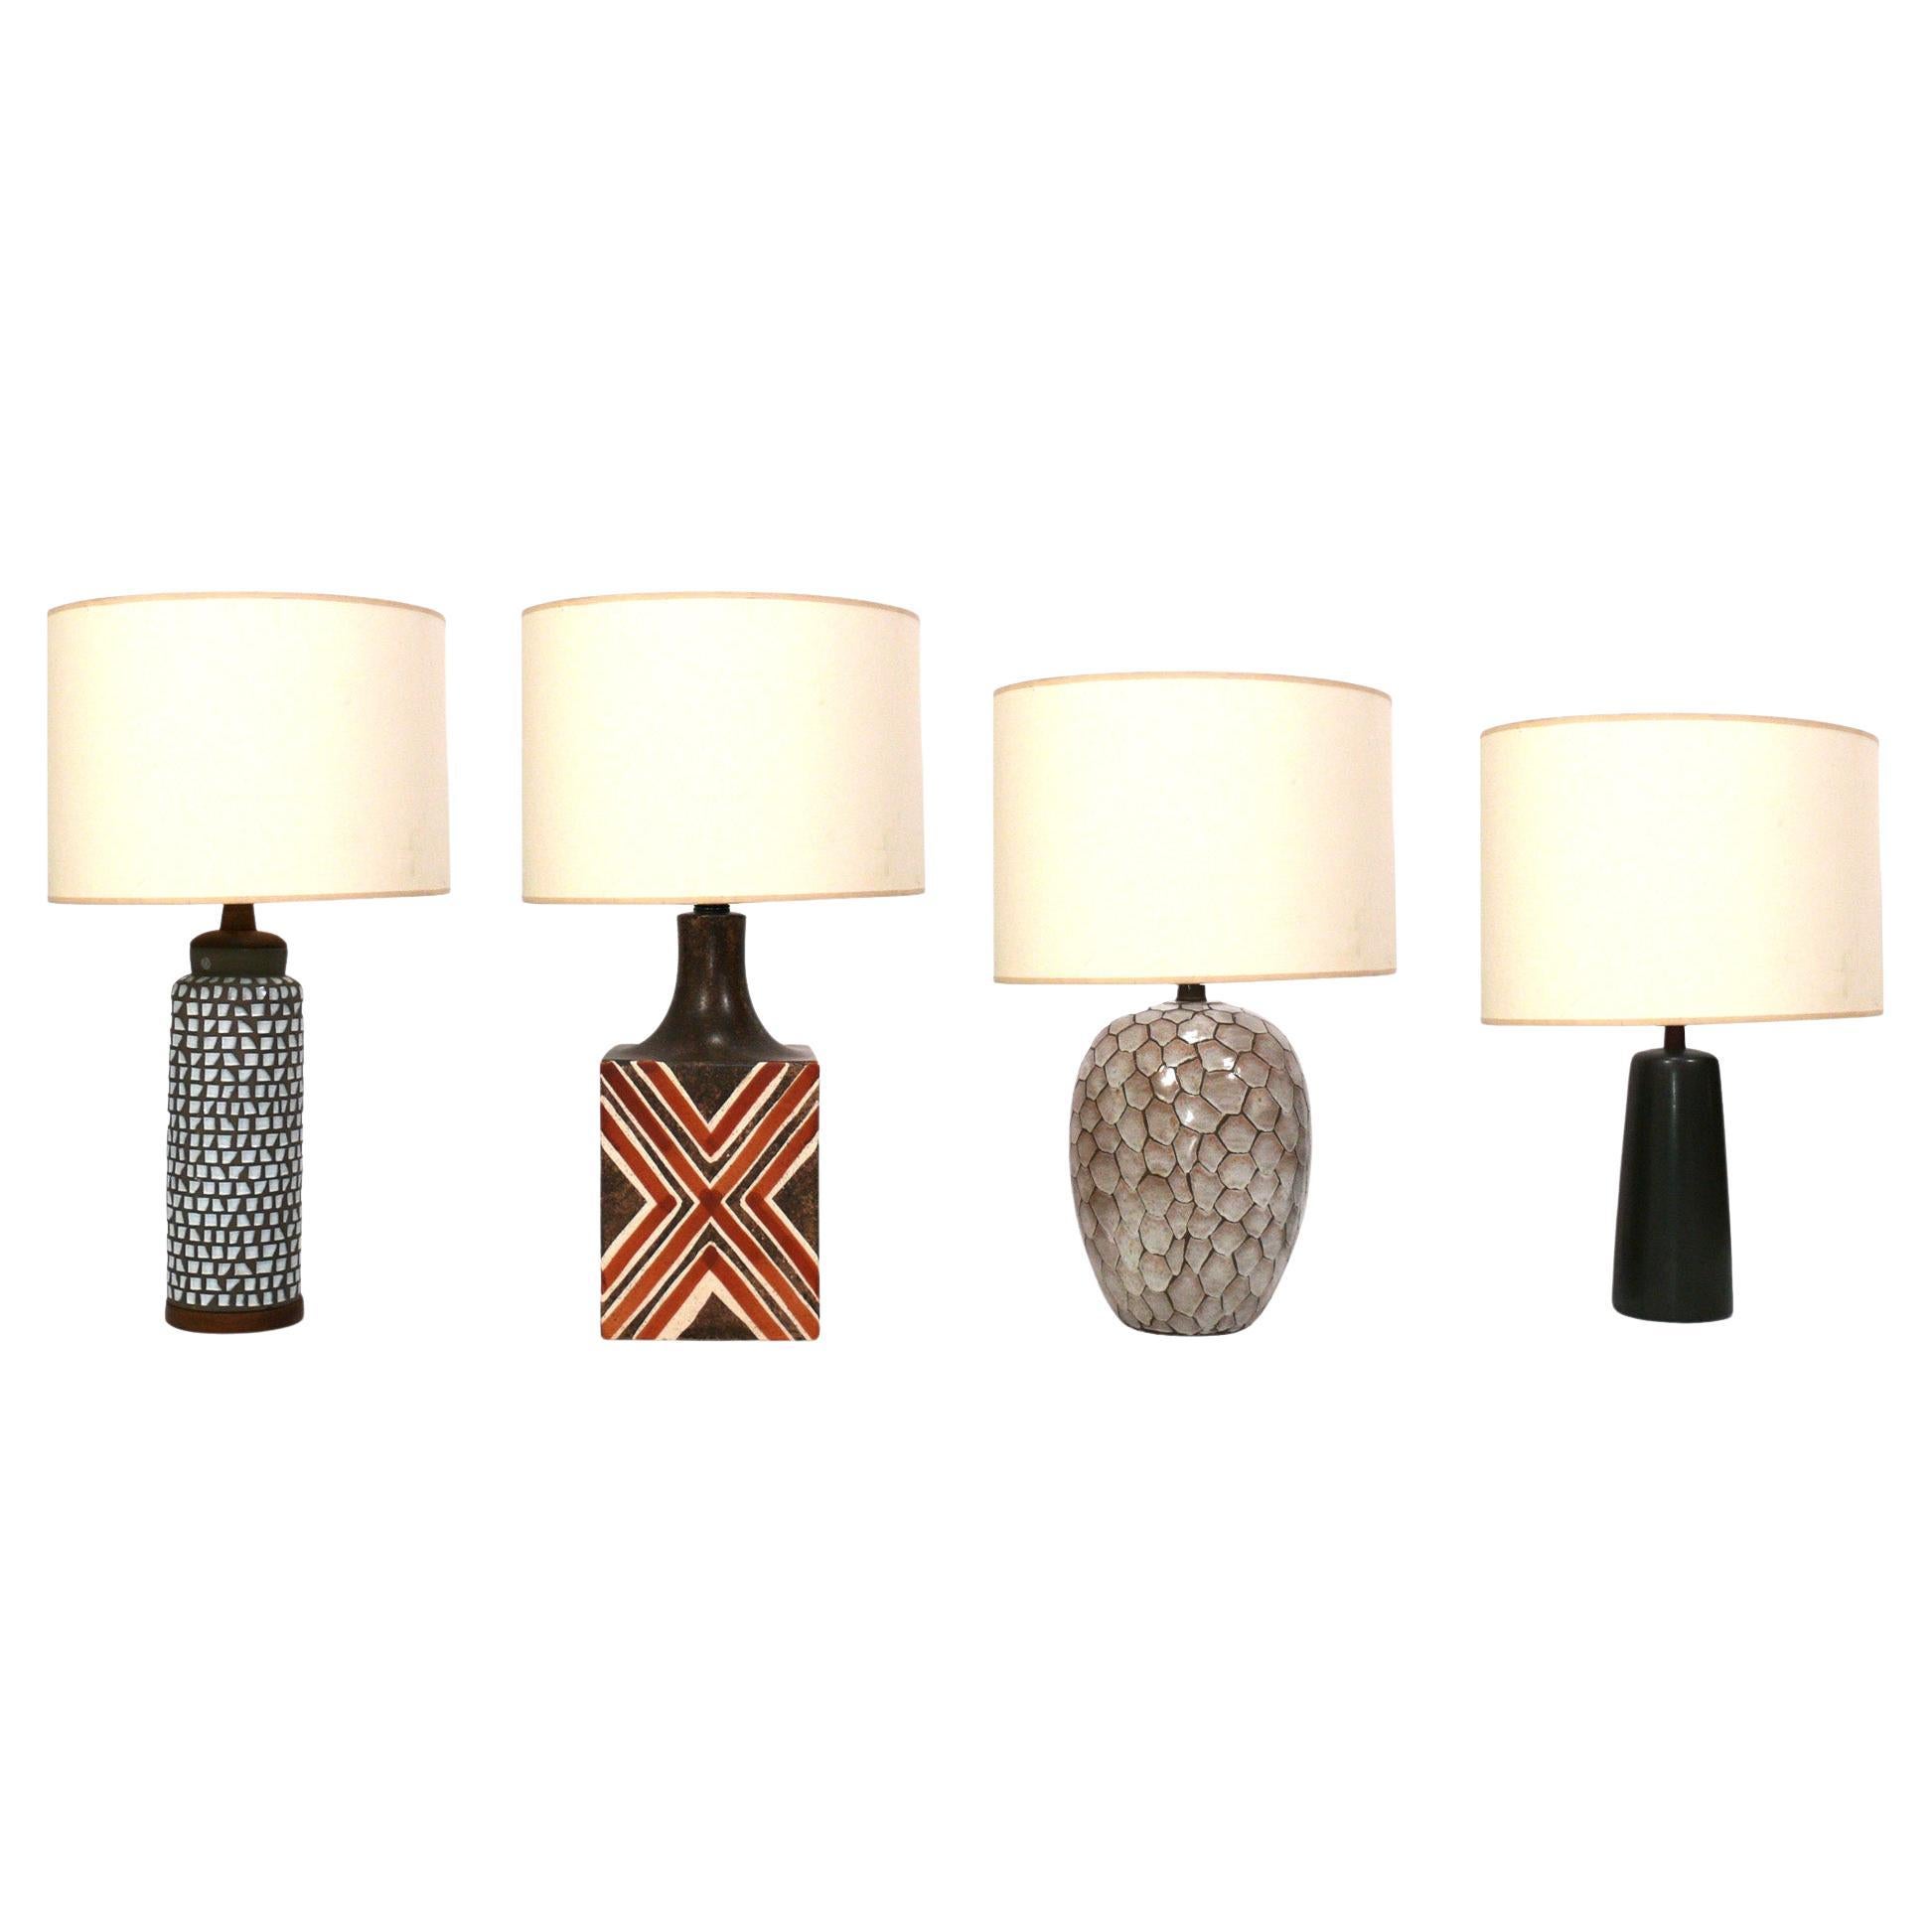 Selection of Midcentury Ceramic Lamps